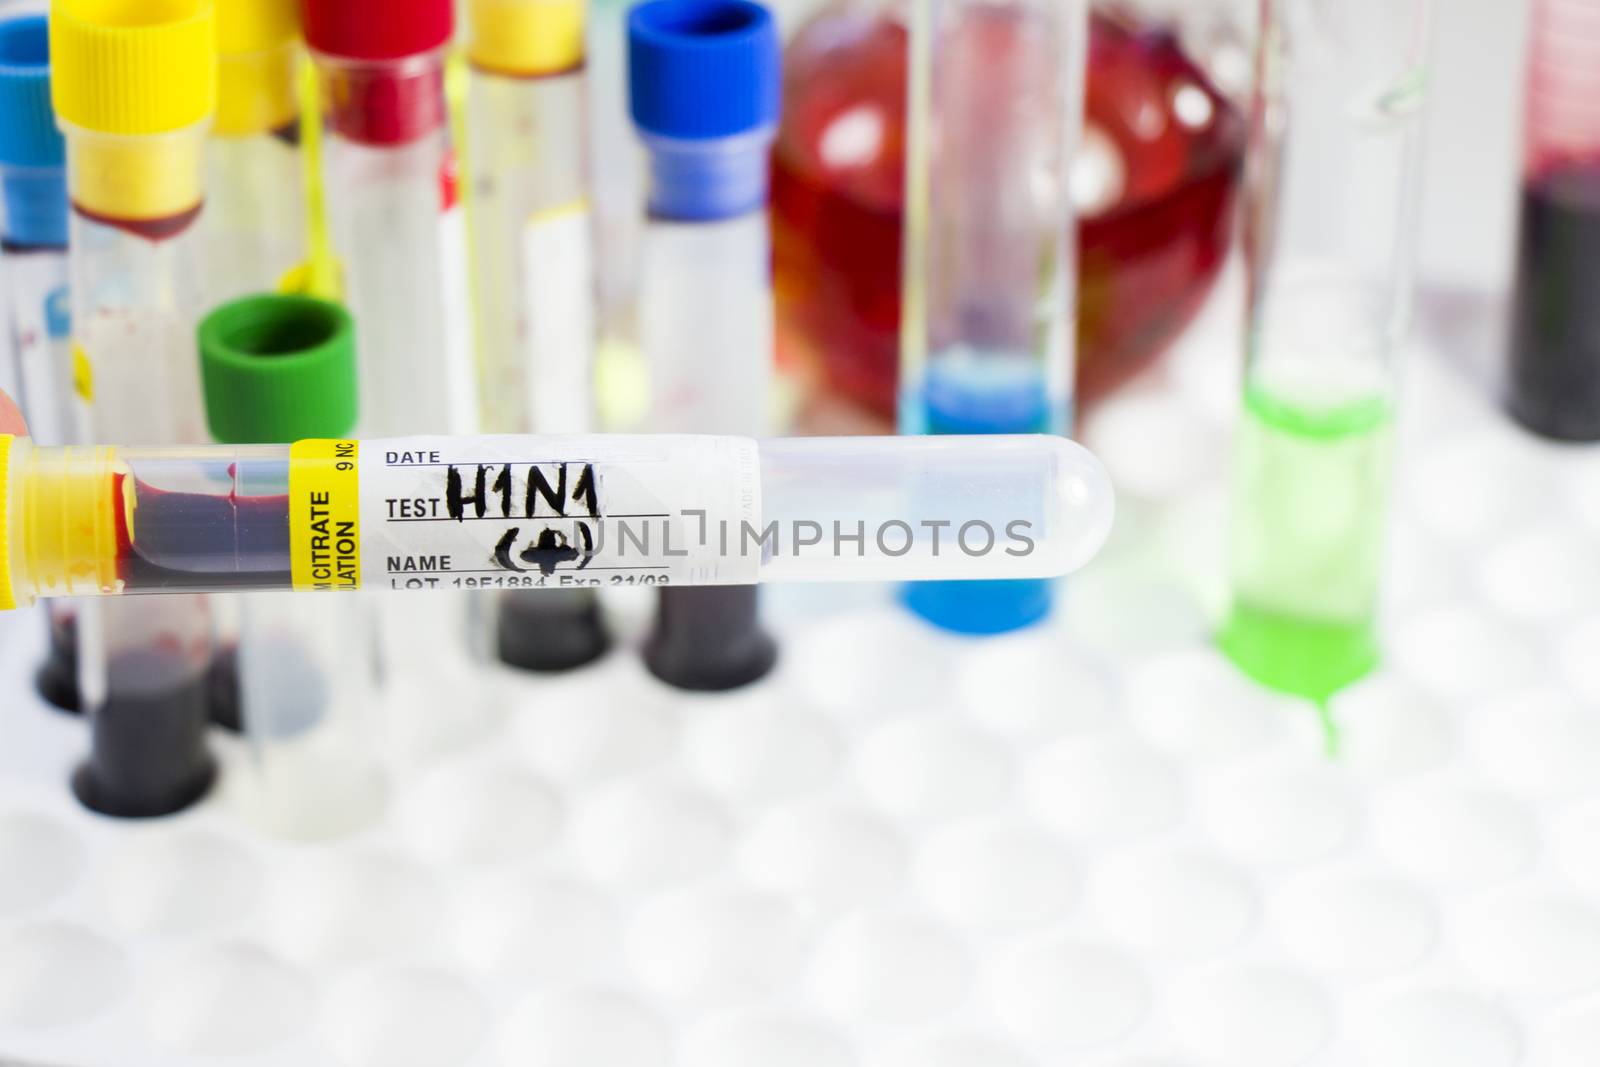 H1N1 swine influenza, diagnoses and lab tests, blood test tube samples, text and letter. by Taidundua